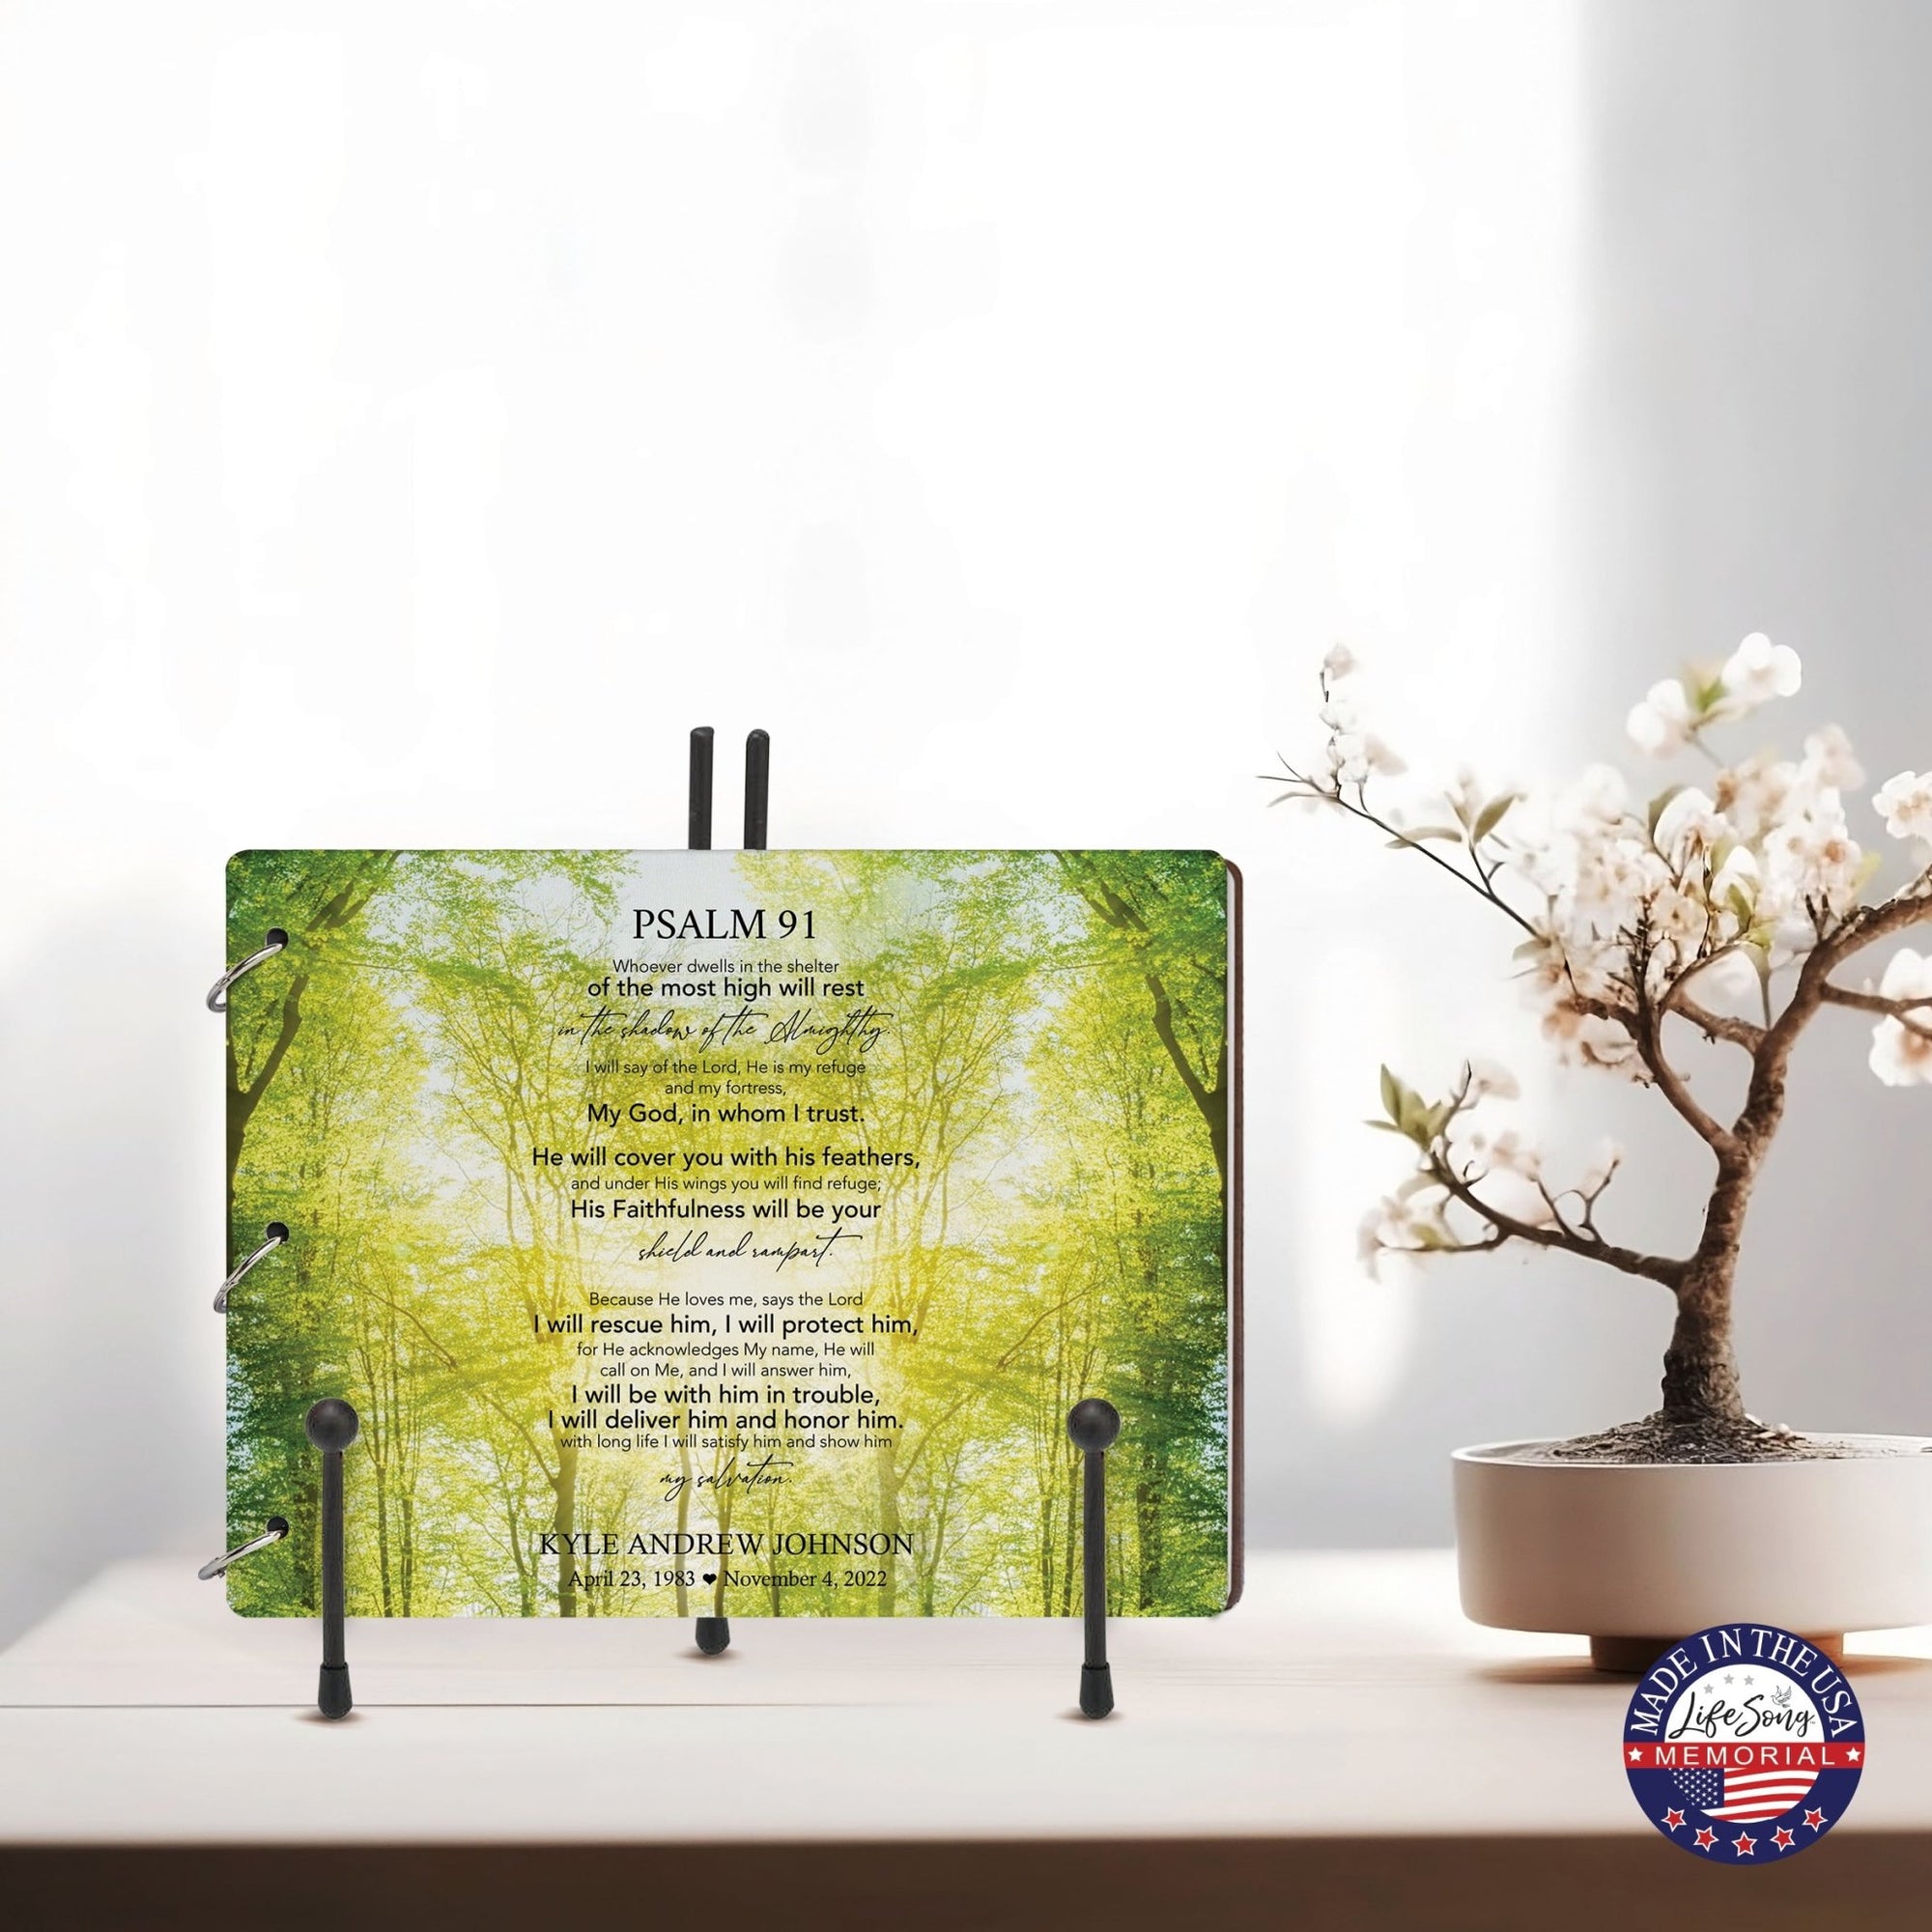 Personalized Celebration Of Life Funeral Guest Books For Memorial Services Registry With Wooden Cover - Psalm 91 - LifeSong Milestones